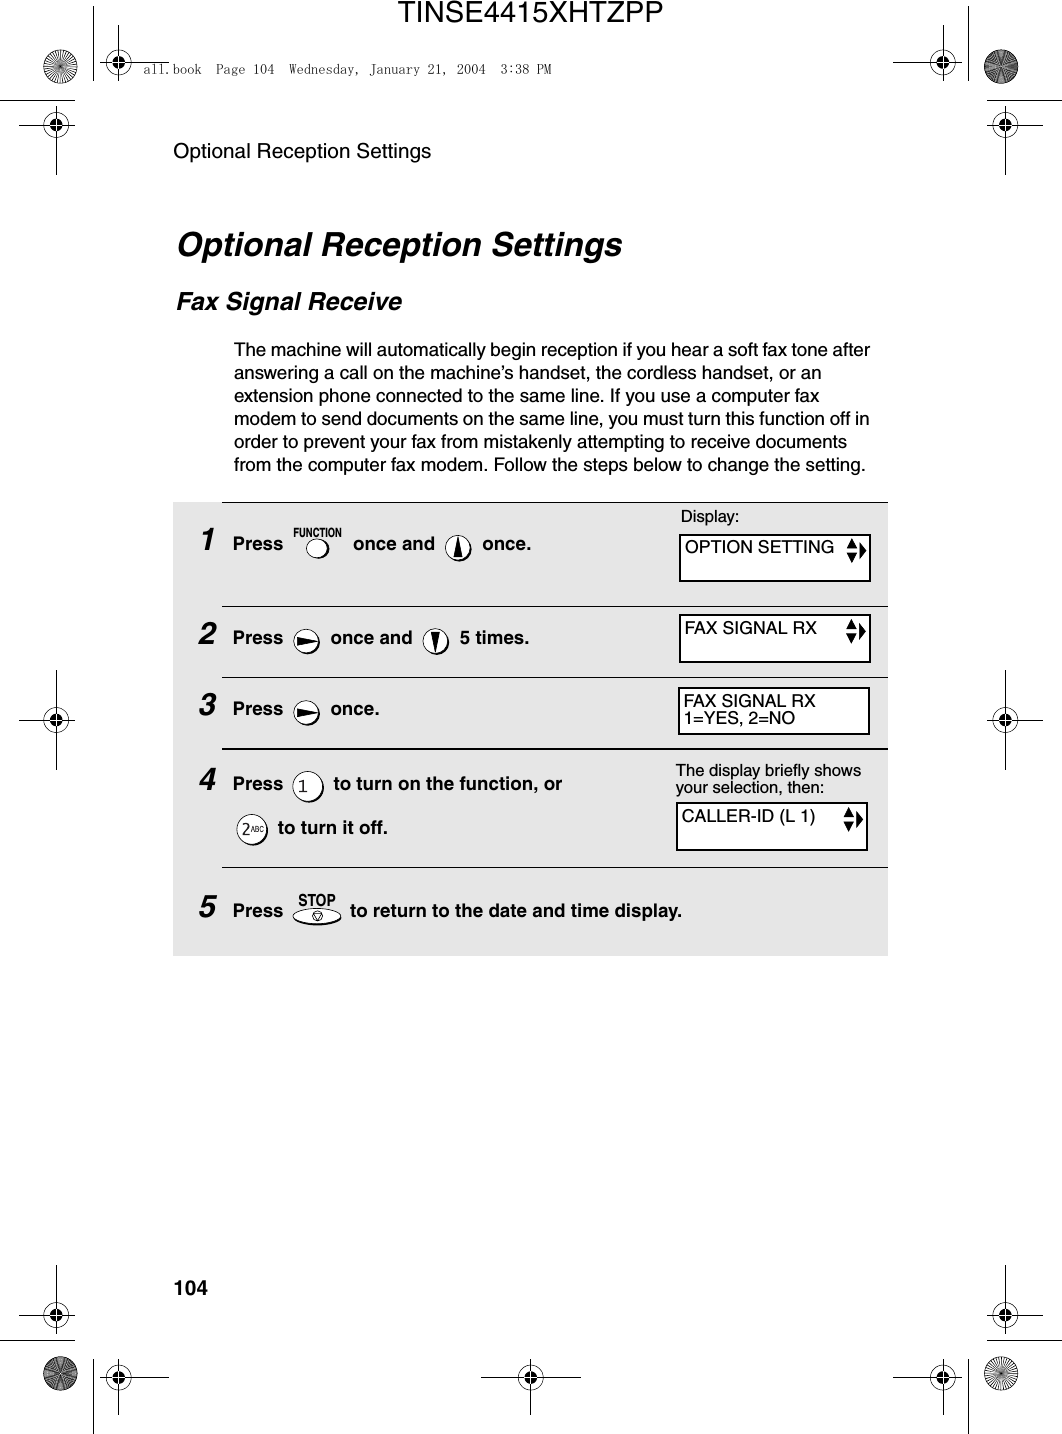 Optional Reception Settings104Optional Reception SettingsFax Signal ReceiveThe machine will automatically begin reception if you hear a soft fax tone after answering a call on the machine’s handset, the cordless handset, or an extension phone connected to the same line. If you use a computer fax modem to send documents on the same line, you must turn this function off in order to prevent your fax from mistakenly attempting to receive documents from the computer fax modem. Follow the steps below to change the setting.1Press   once and   once.2Press   once and   5 times.3Press  once.4Press   to turn on the function, or   to turn it off.  5Press   to return to the date and time display.FUNCTIONSTOPThe display briefly shows your selection, then:CALLER-ID (L 1)Display:OPTION SETTINGFAX SIGNAL RXFAX SIGNAL RX1=YES, 2=NOall.book  Page 104  Wednesday, January 21, 2004  3:38 PMTINSE4415XHTZPP